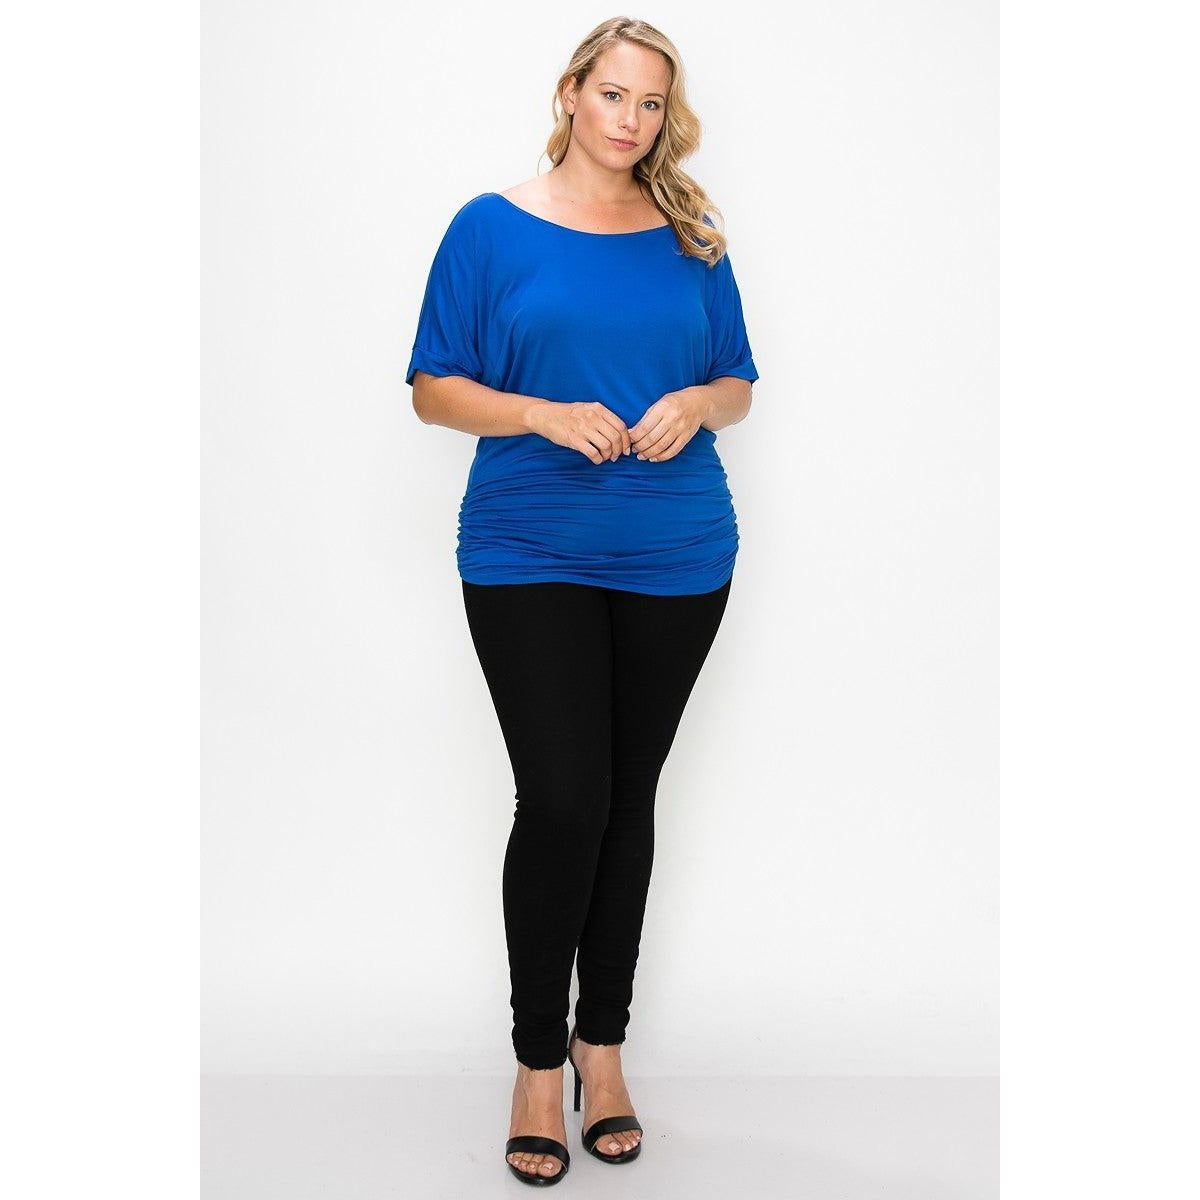 Short Sleeve Top Featuring A Round Neck And Ruched Sides-NXTLVLNYC